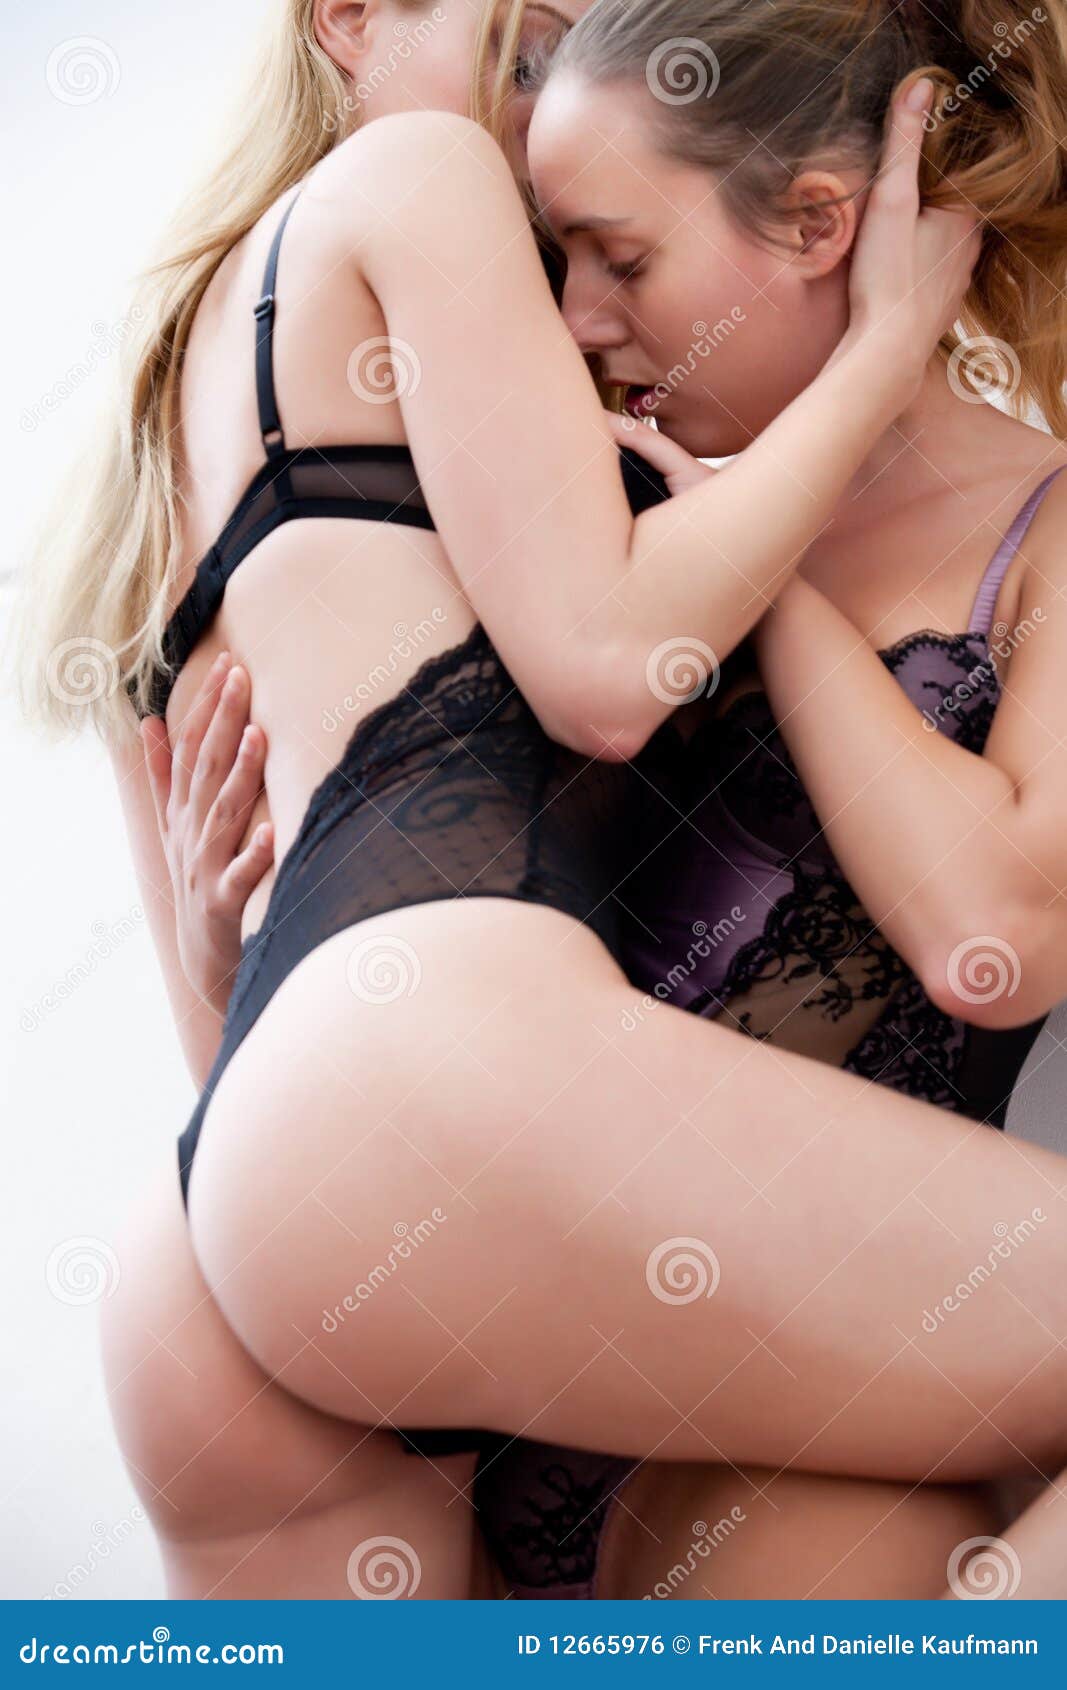 Sexy lesbian foreplay